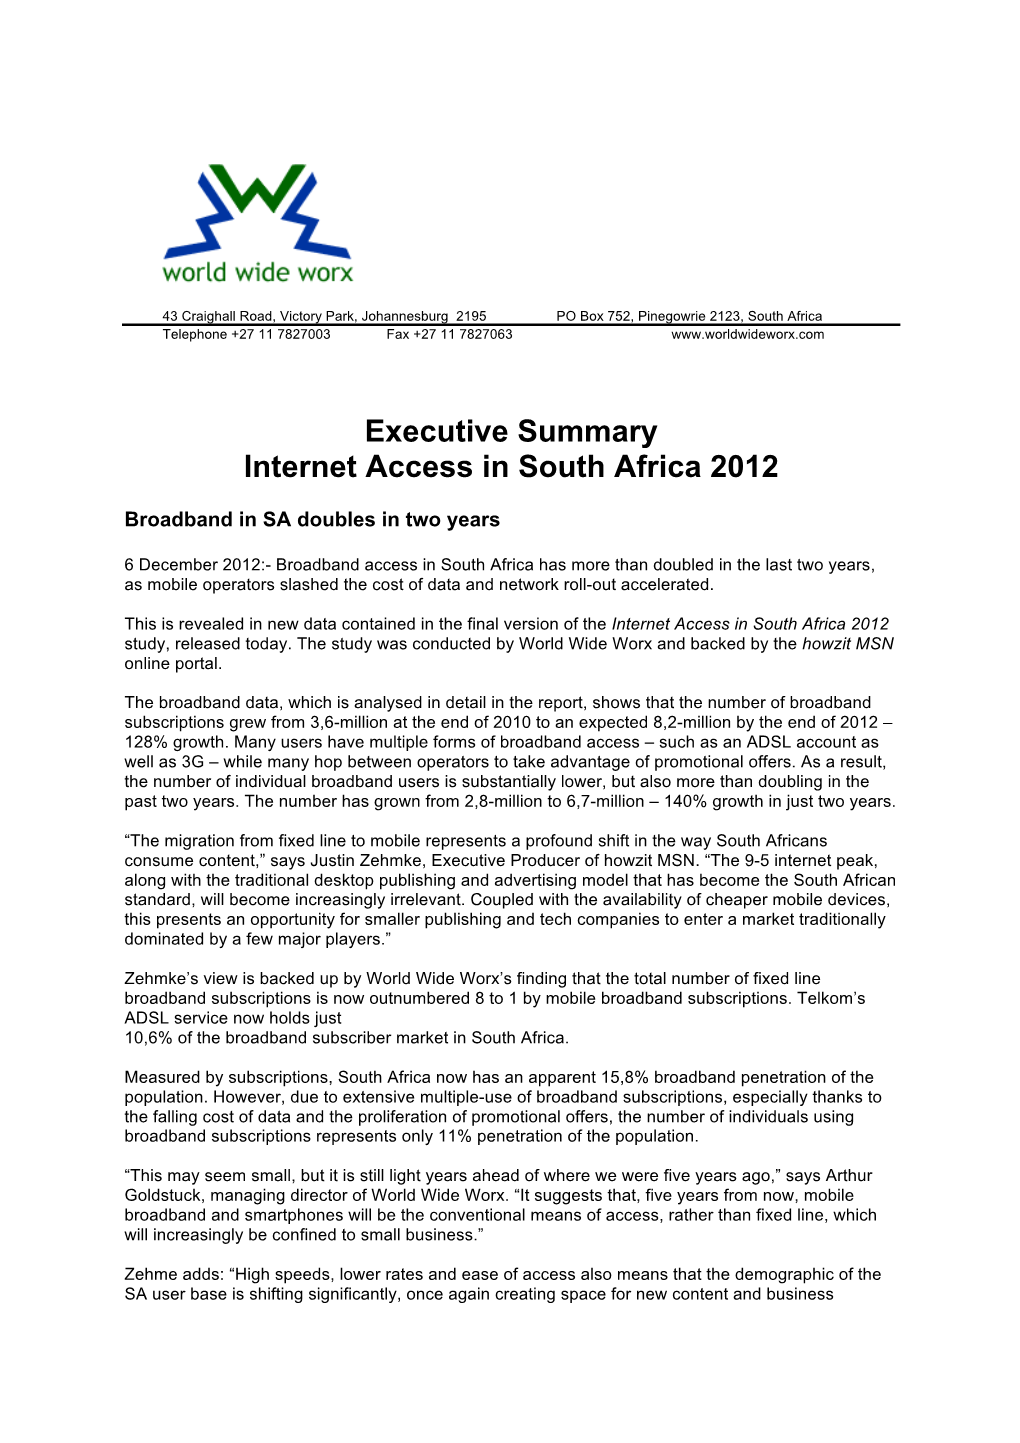 Executive Summary Internet Access in South Africa 2012